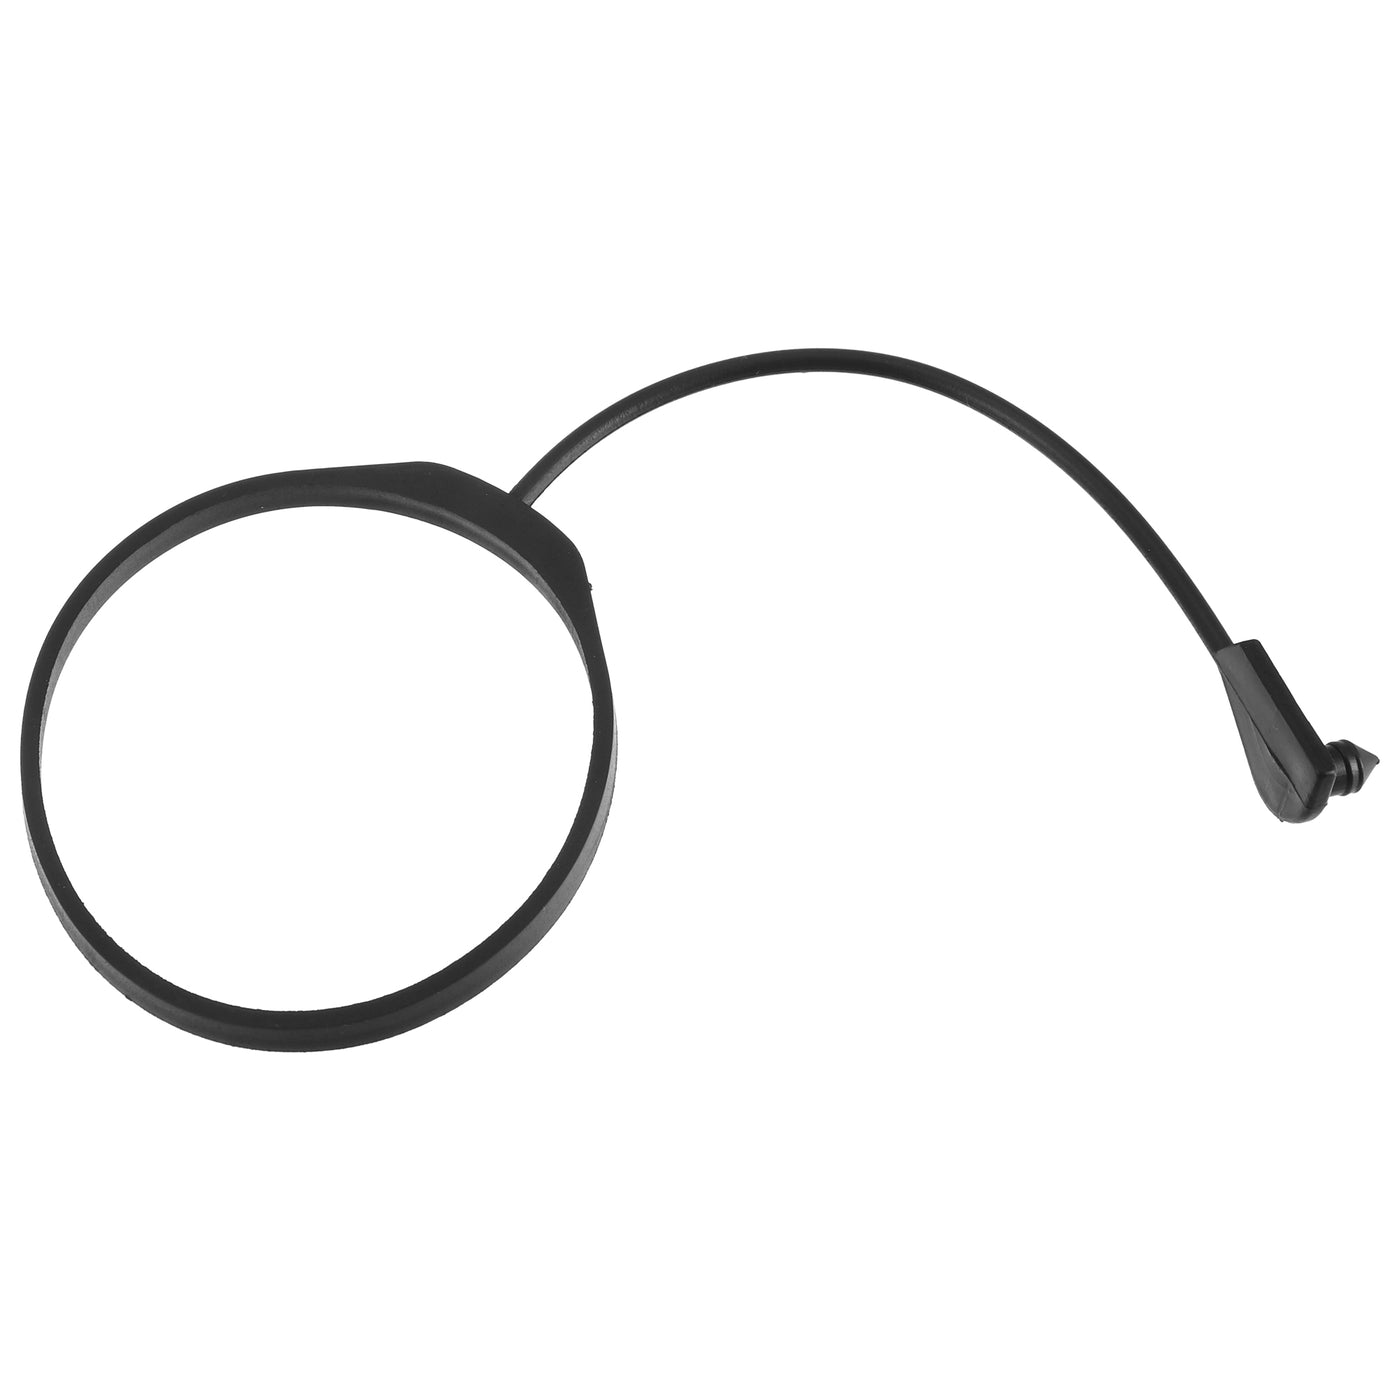 ACROPIX Fuel Tank Cap Tether Fuel Tank Rope Replacement Fit for Land Rover - Pack of 1 Black